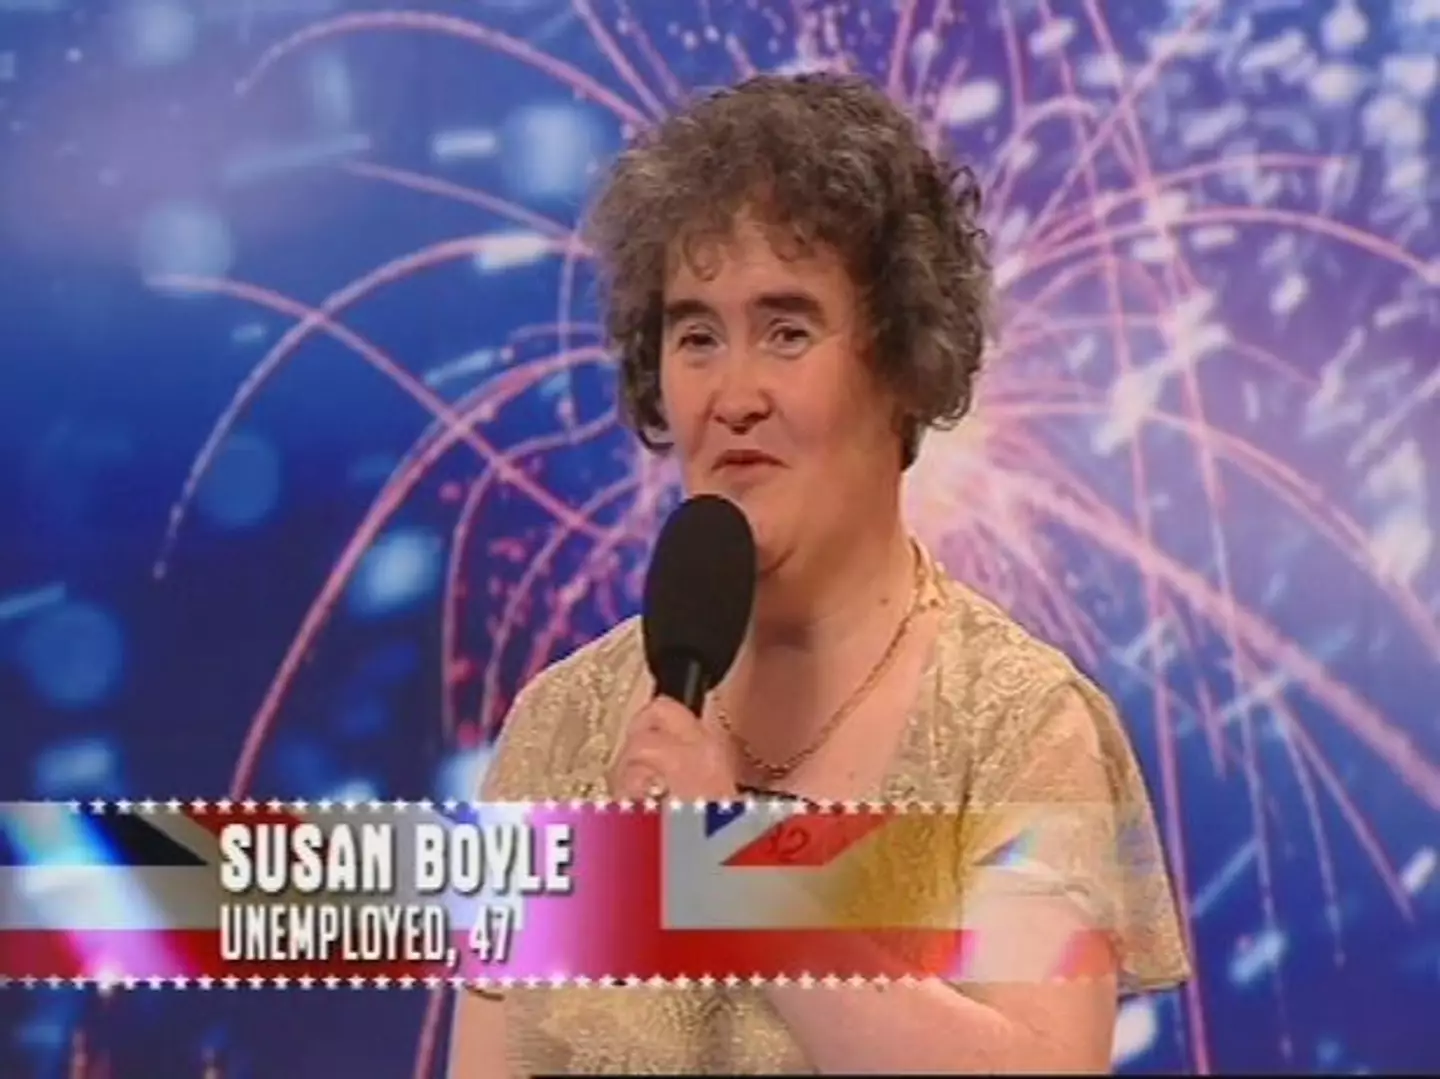 Susan Boyle went on the show in 2009.